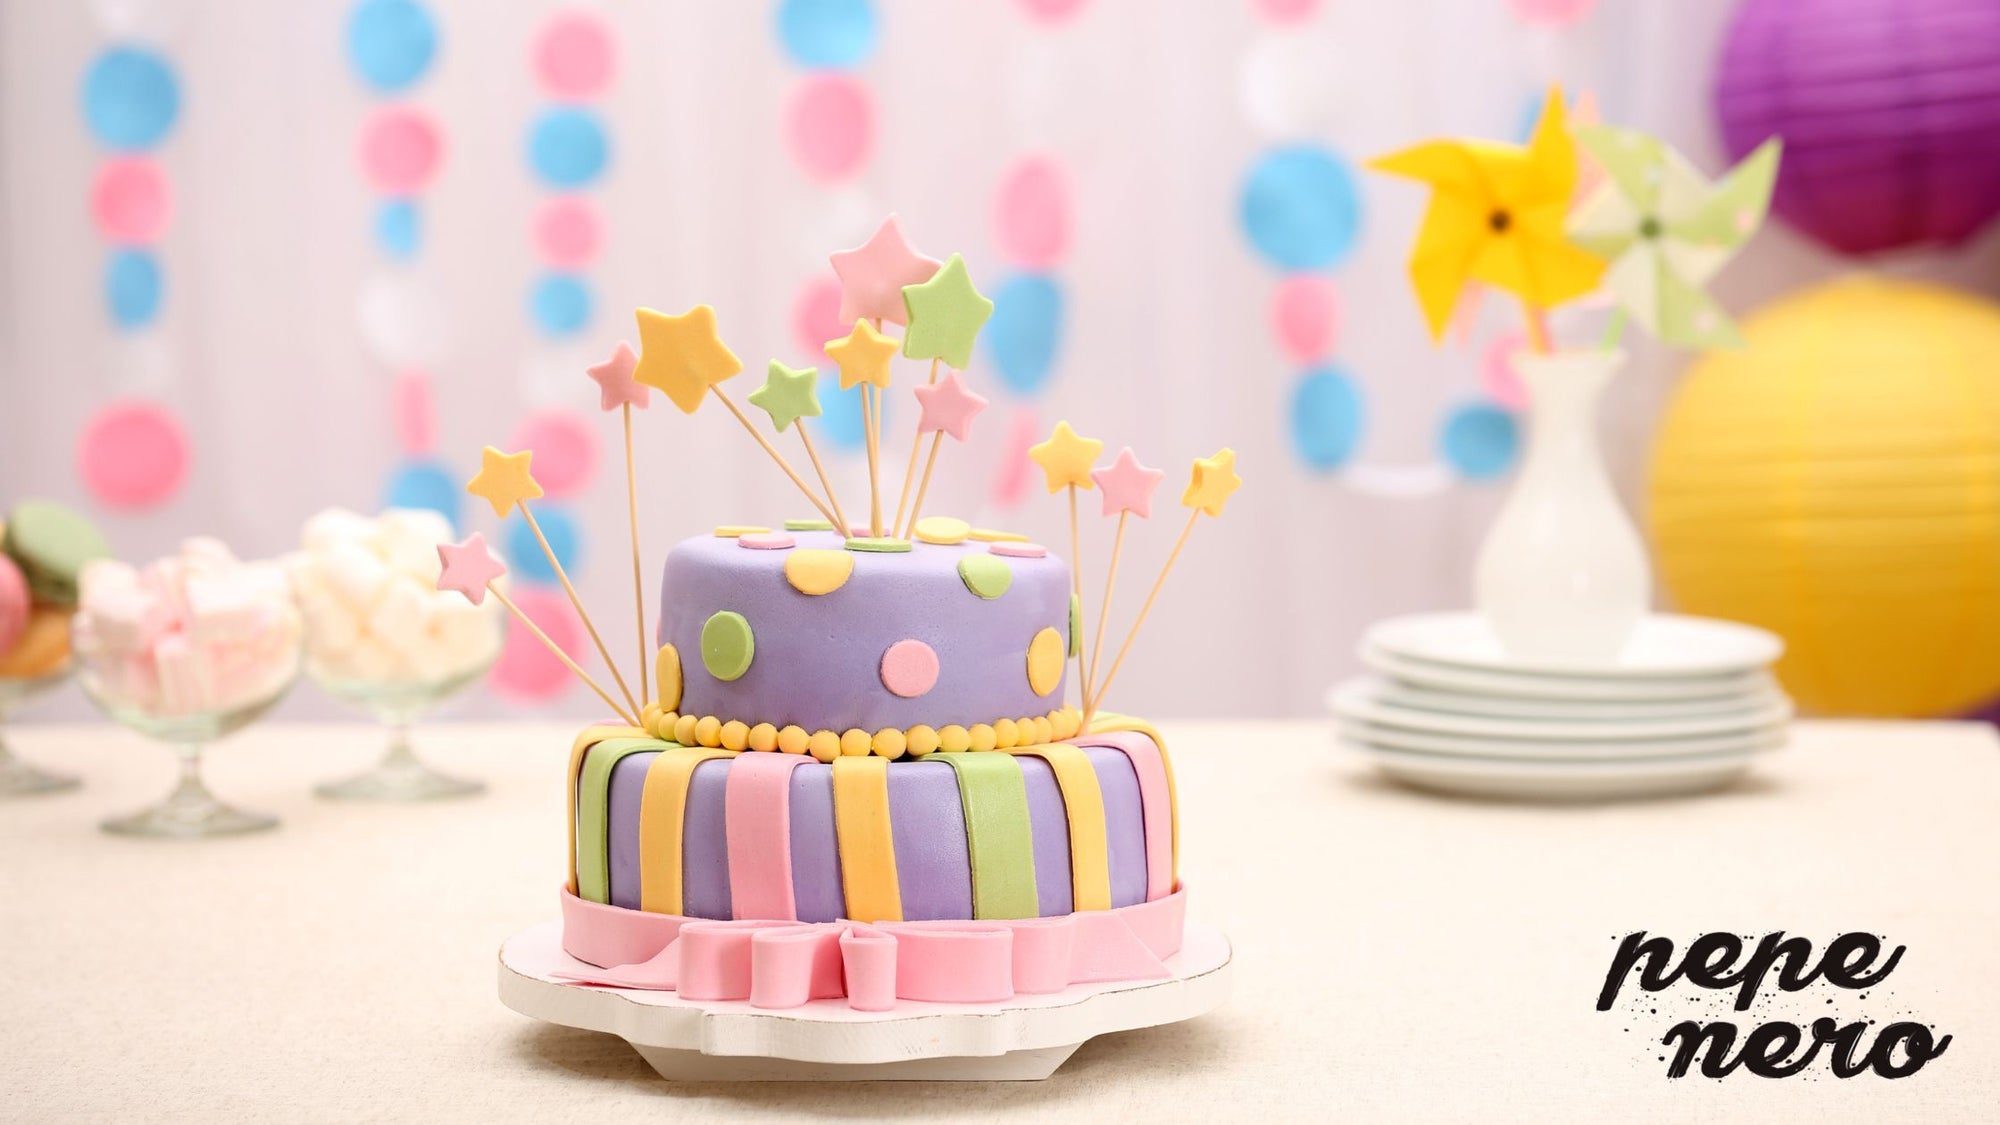 A cake decorated with unicorn colors of fondant icing